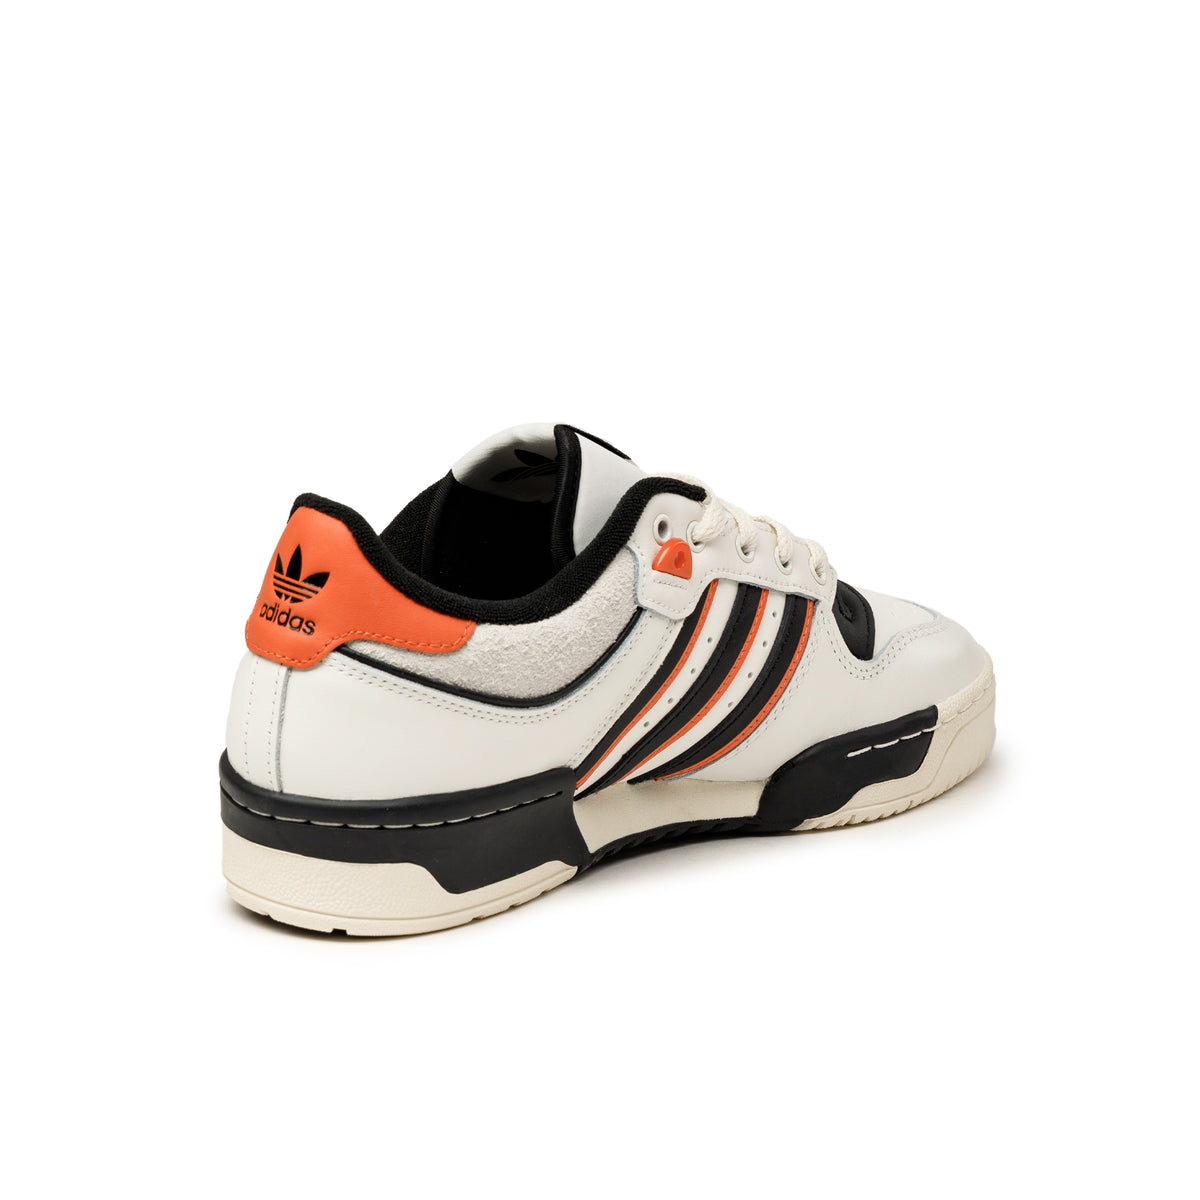 Adidas Rivalry 86 Low – buy now at Asphaltgold Online Store!